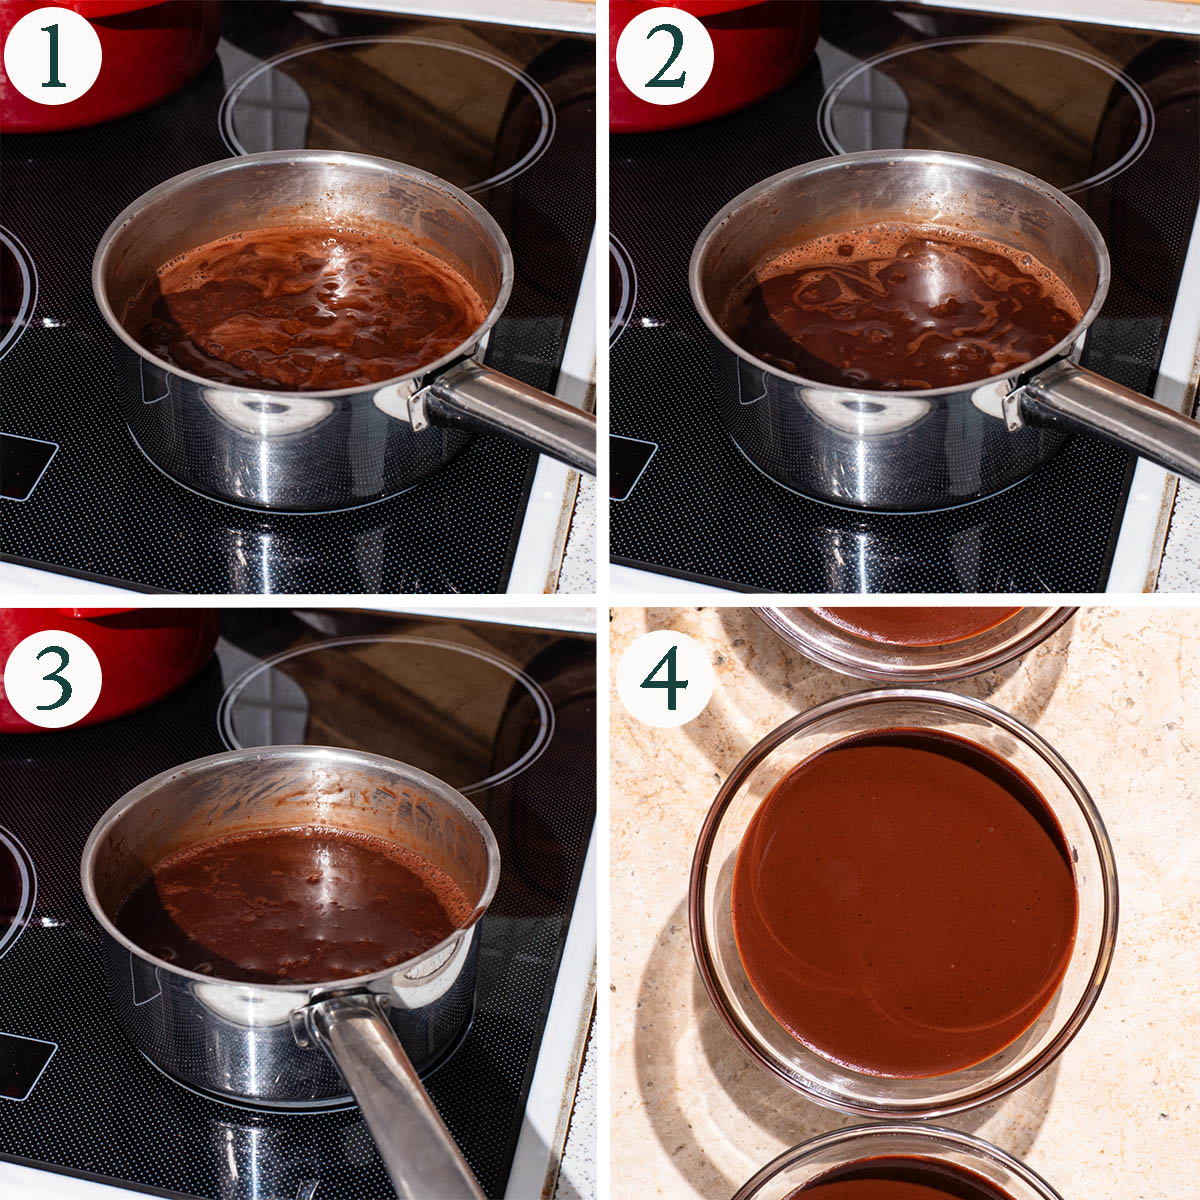 Pudding steps 1 to 4, mixed ingredients, boiling, after chocolate added, and in bowls.